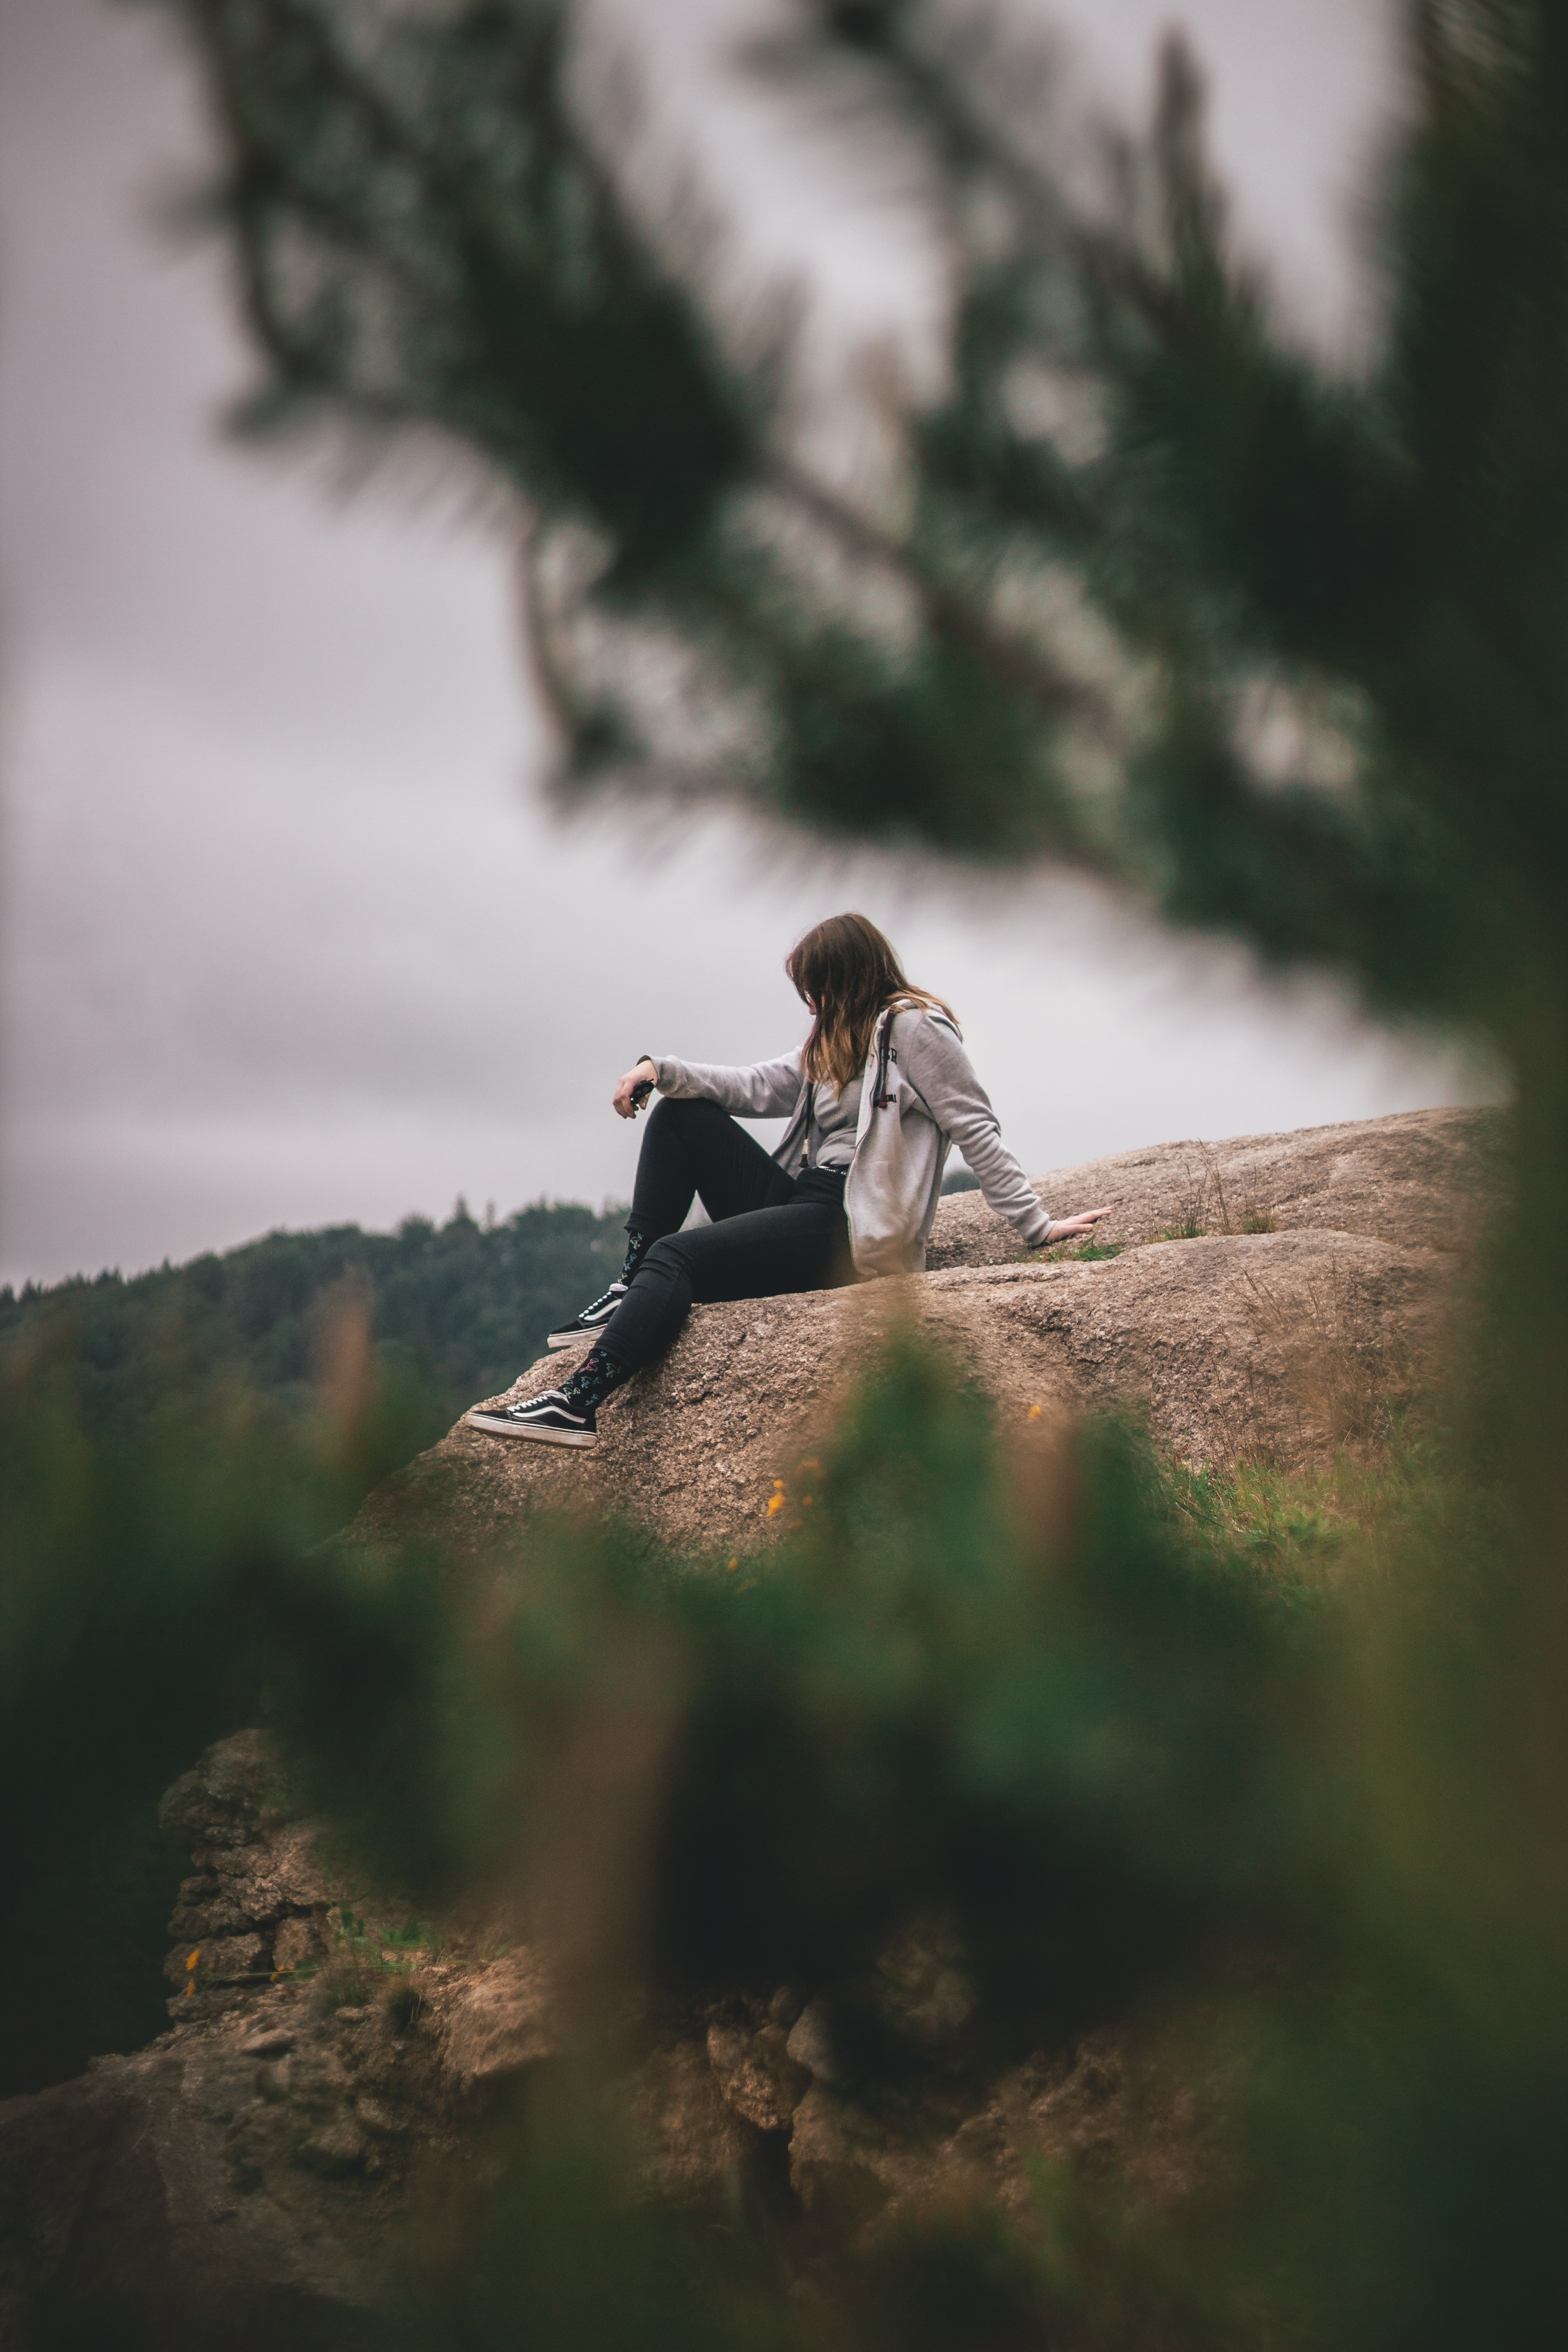 Download background alone, privacy, seclusion, miscellanea, miscellaneous, branches, girl, loneliness, lonely